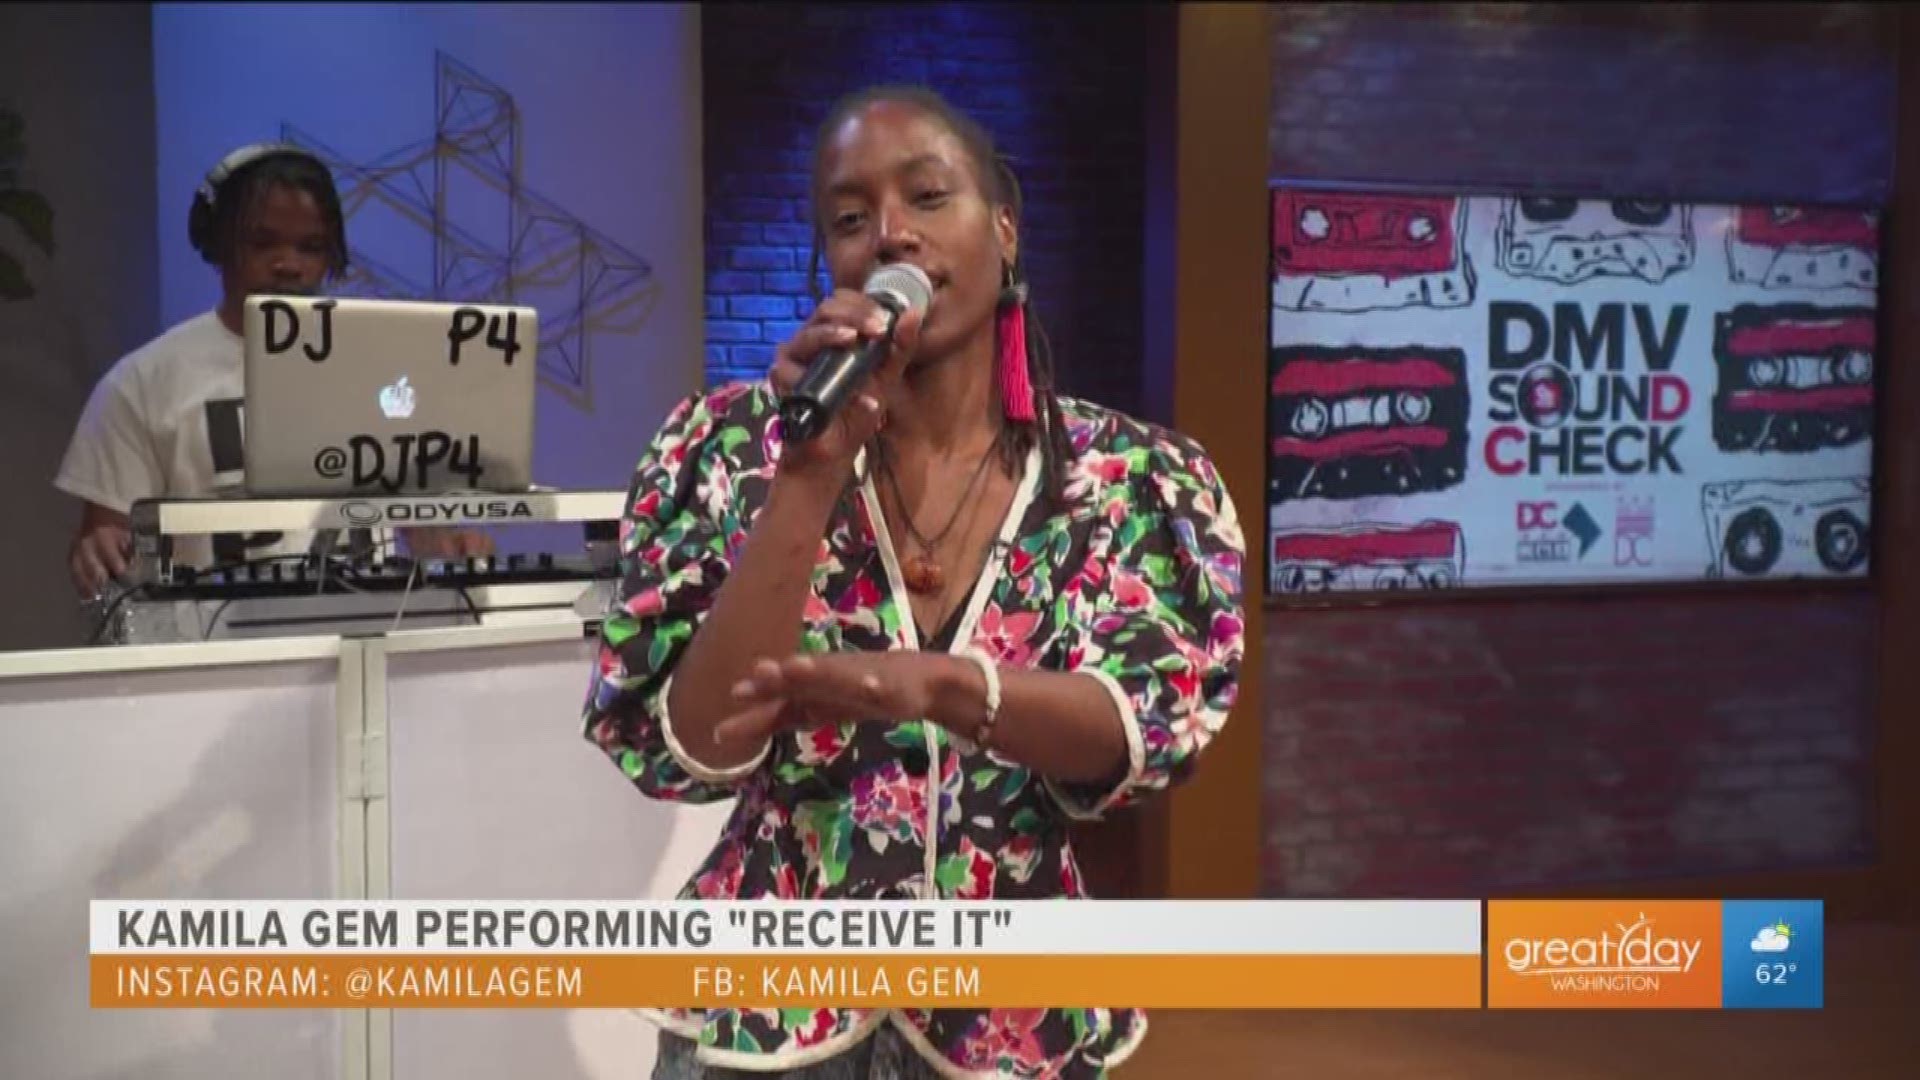 For this week's DMV Soundcheck performance, Kamila Gem radiates positive energy with the performance of her single 'Receive It'.  Check her out on IG @kamilagem.